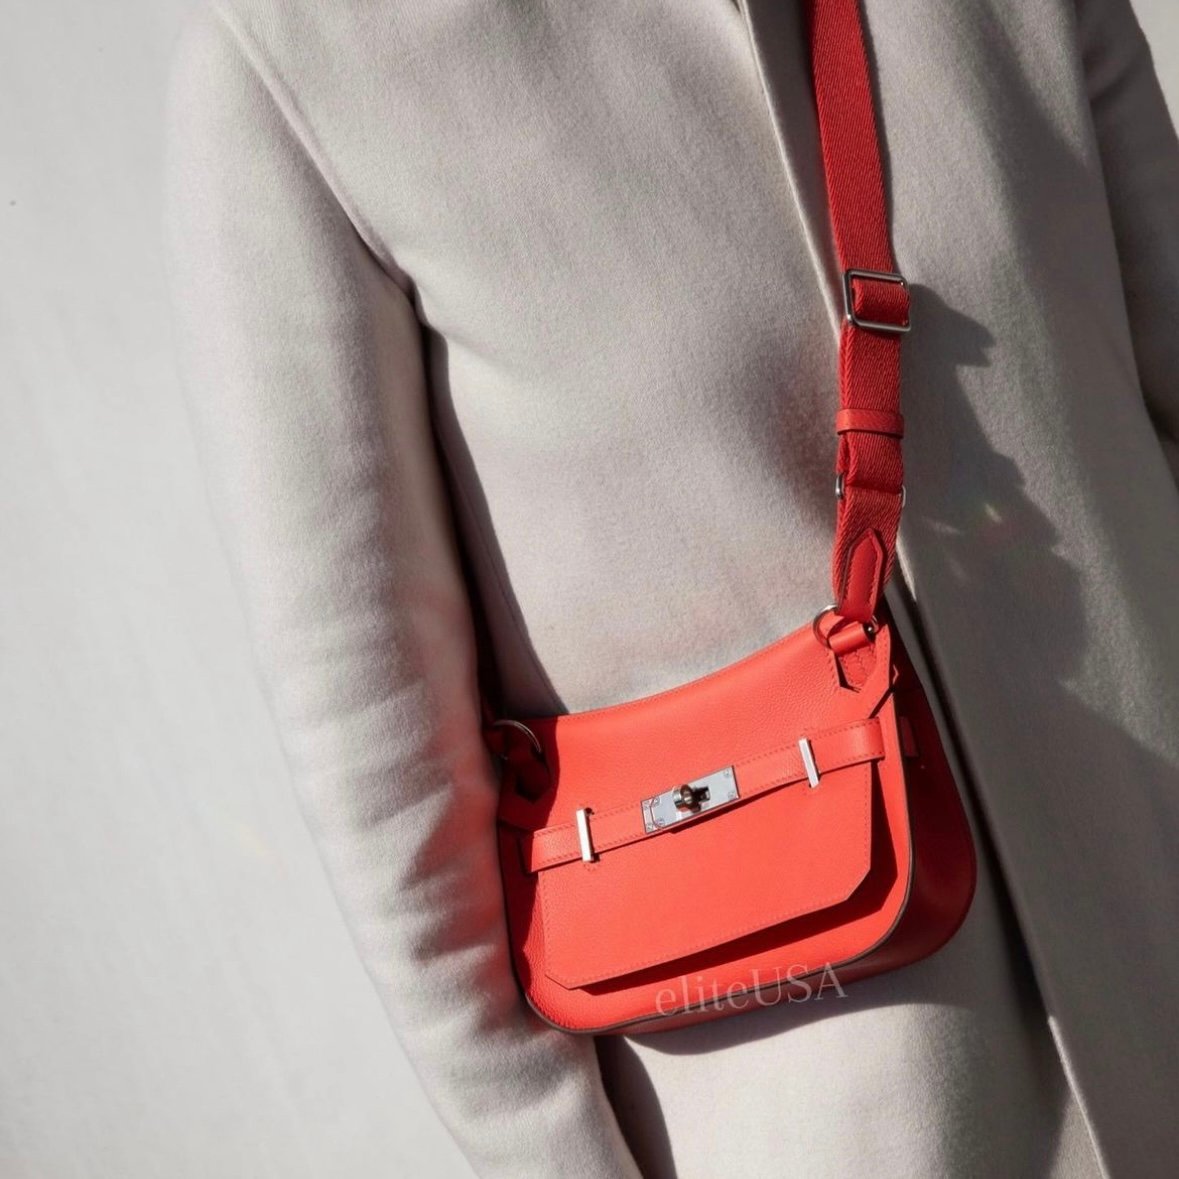 Hermès Jypsiere Bag Guide: Size, Price & More – Is It Worth the